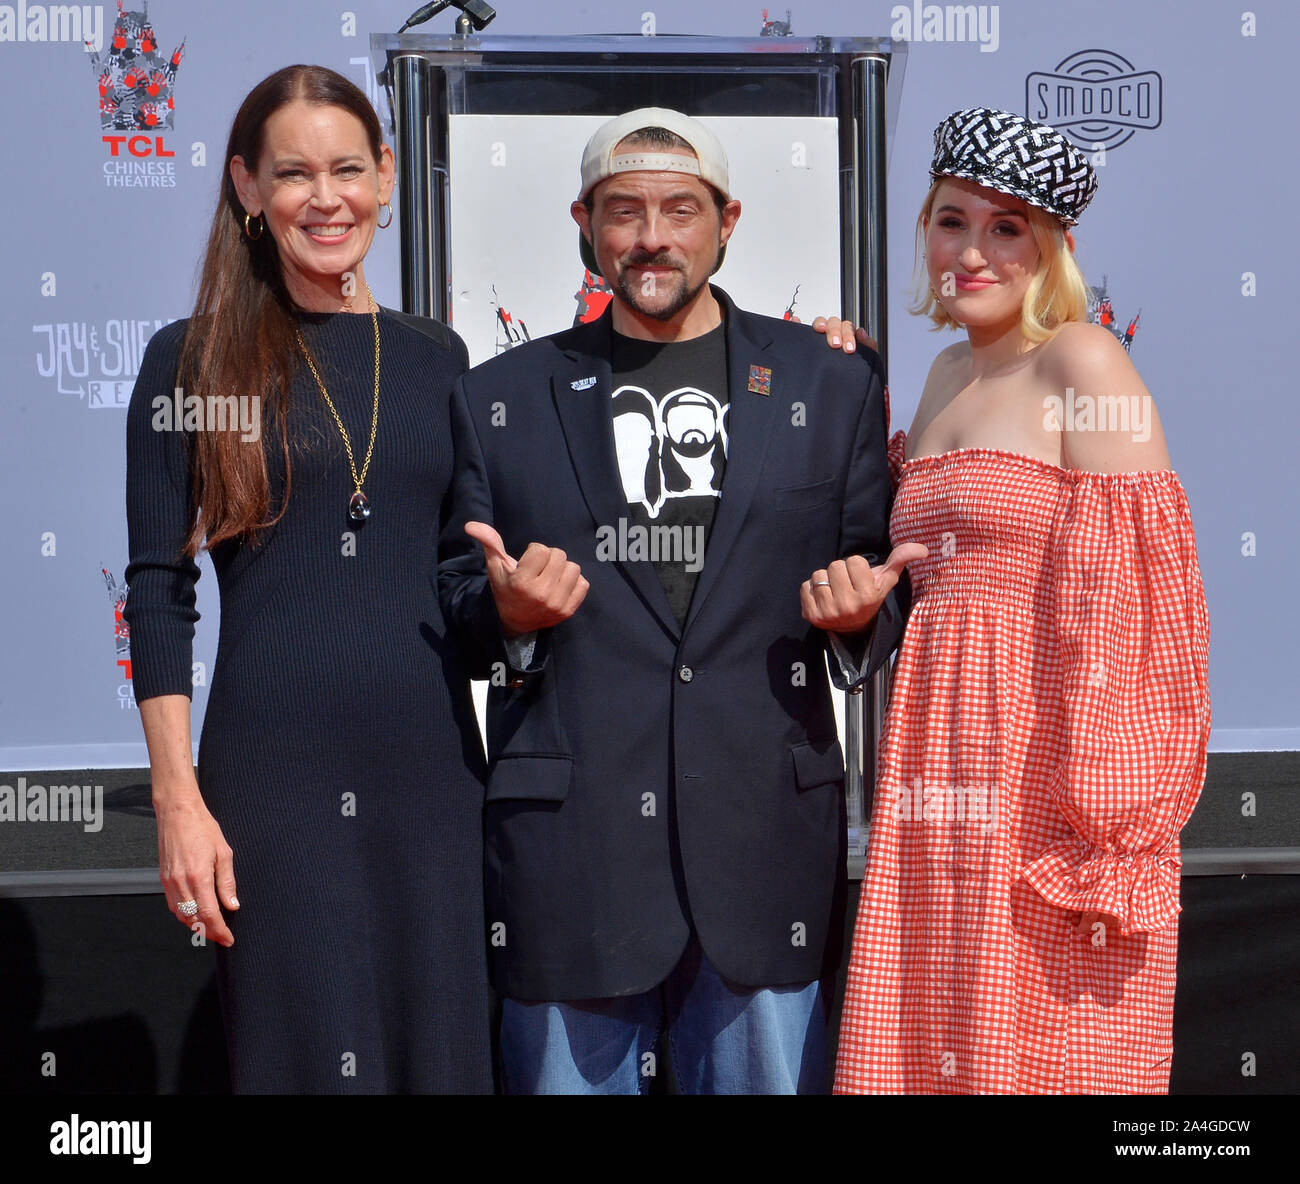 Los Angeles, United States. 14th Oct, 2019. Actor Kevin Smith (C) is joined by his wife Jennifer Schwalbach Smith (L) and their daughter Harley Quinn Smith during a hand and footprint ceremony immortalizing Kevin Smith and Jason Mewes in the forecourt of the TCL Chinese Theatre (formerly Grauman's) in the Hollywood section of Los Angeles on Monday October 14, 2019. Photo by Jim Ruymen/UPI Credit: UPI/Alamy Live News Stock Photo